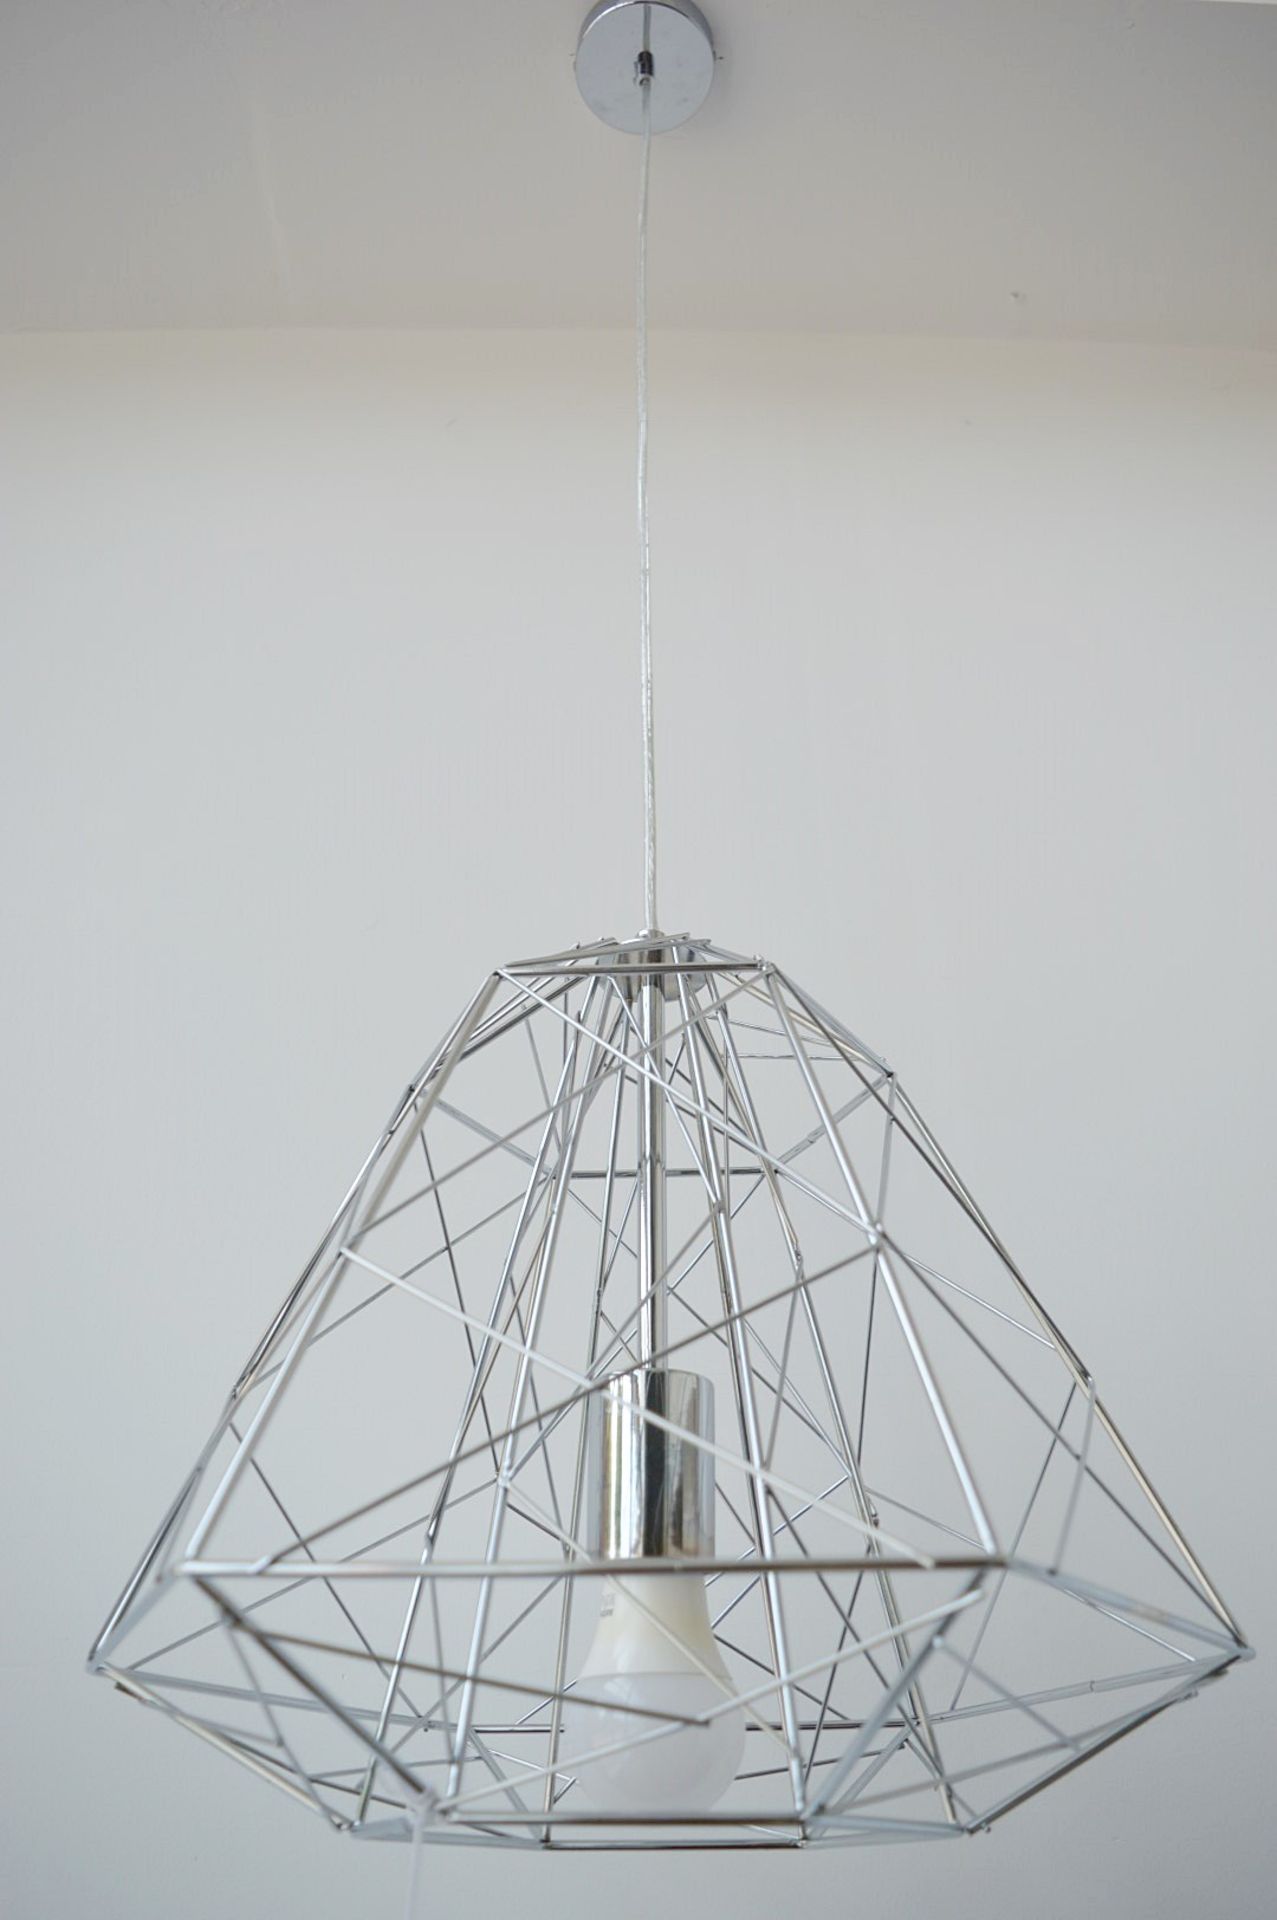 1 x GEOMETRIC Cage Frame Pendant Light Fitting With A Shiny Chrome Finish - Ex Display Stock - Image 2 of 3